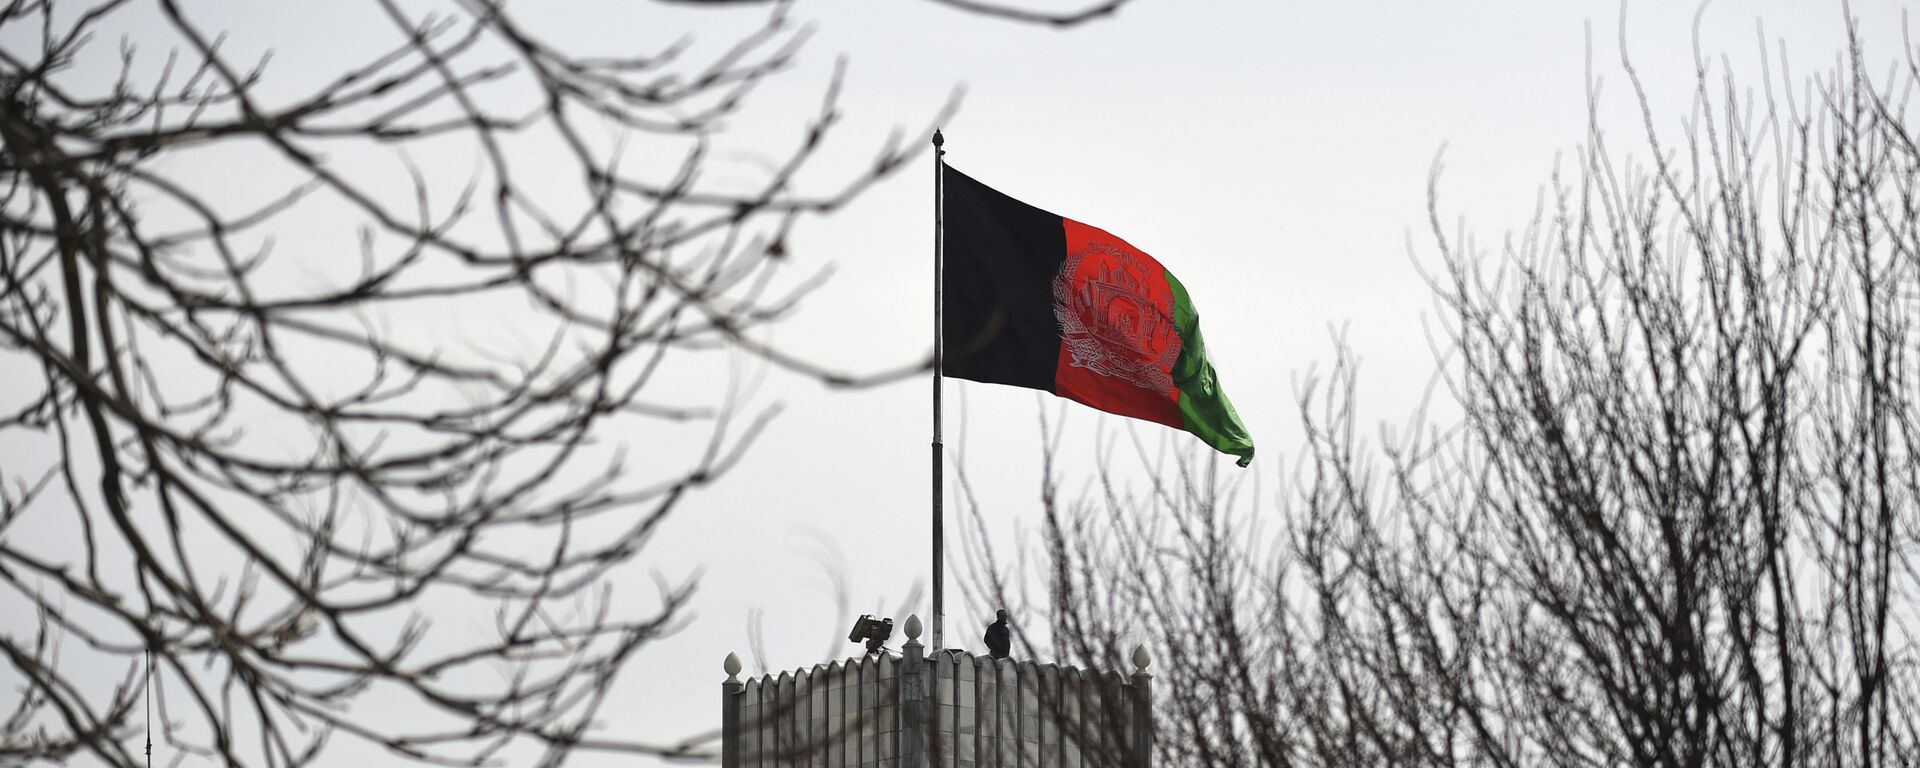 An Afghan security personnel keeps watch on a tower as the Afghan national flag flutters ahead of the start of Afghanistan President Ashraf Ghani's swearing-in inauguration ceremony, at the Presidential Palace in Kabul on March 9, 2020. - Sputnik International, 1920